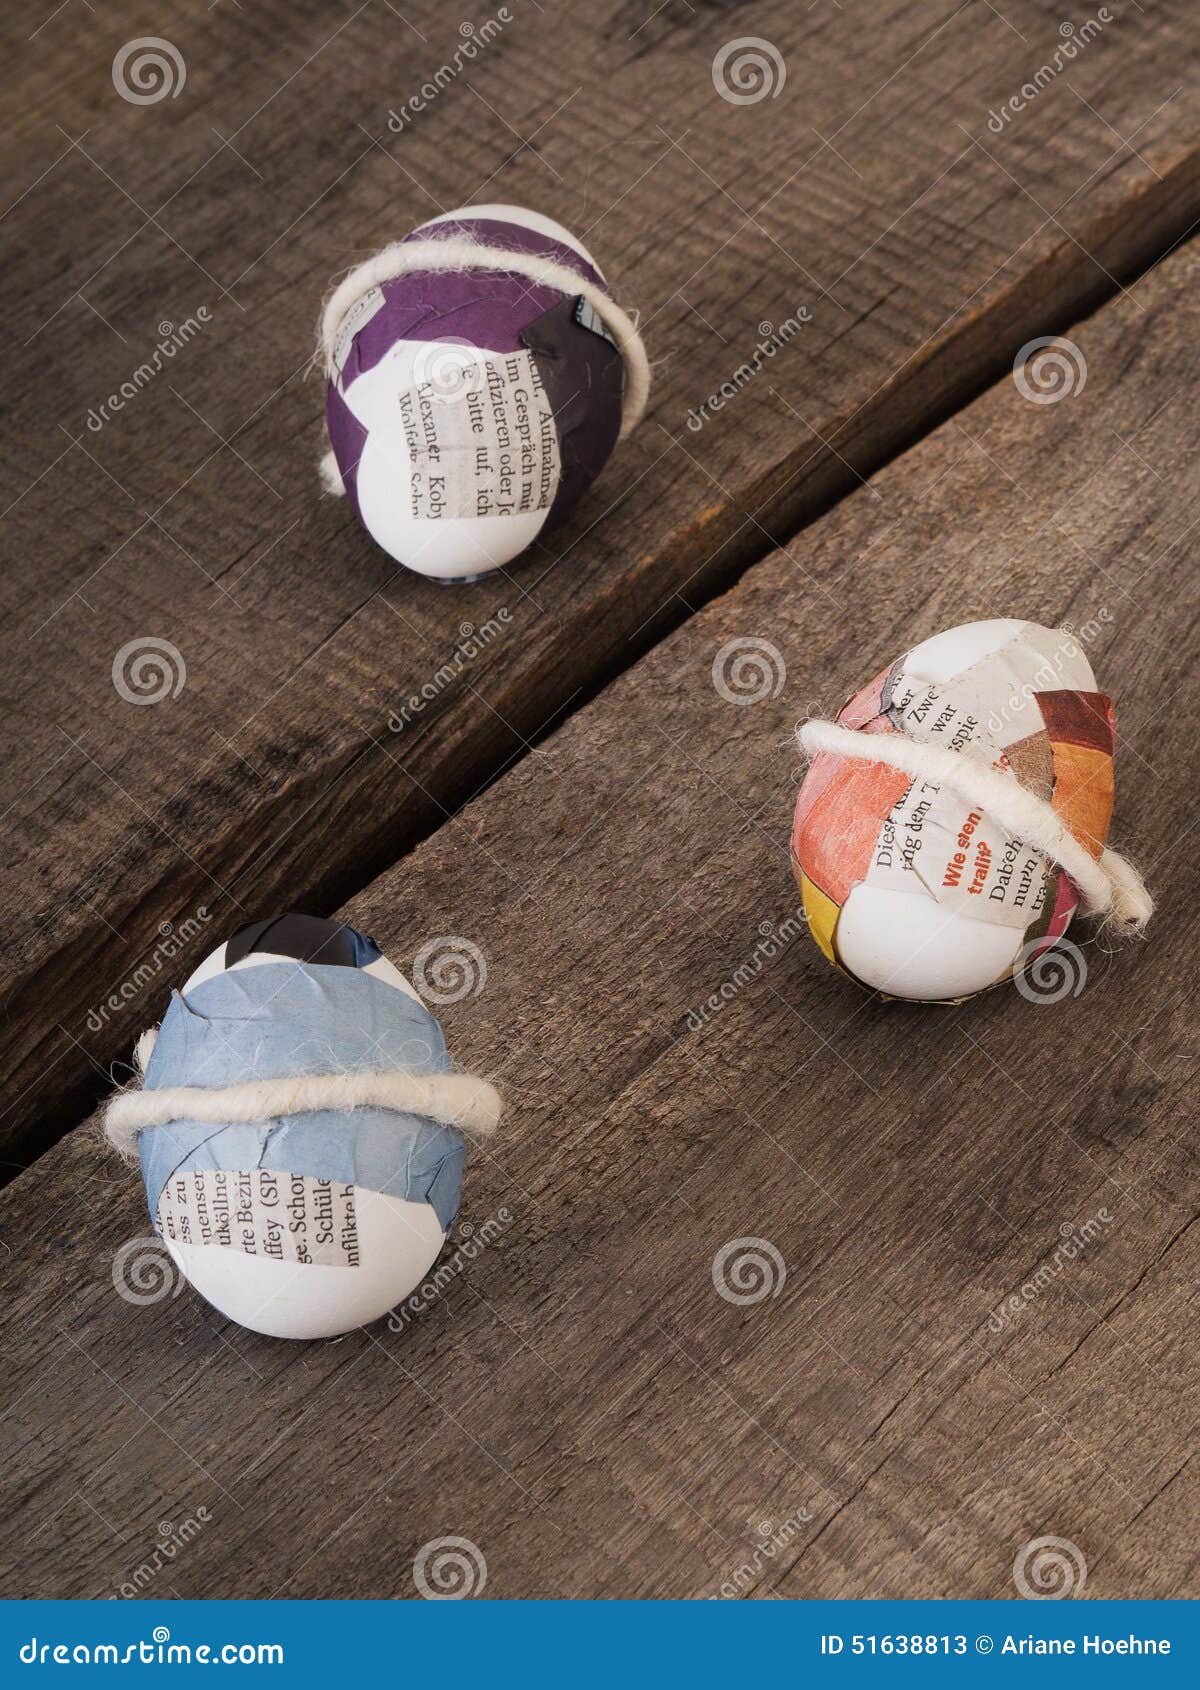 Beautiful selfmade easter eggs. Three selfmade easter eggs sticked with newspaper on a wooden table